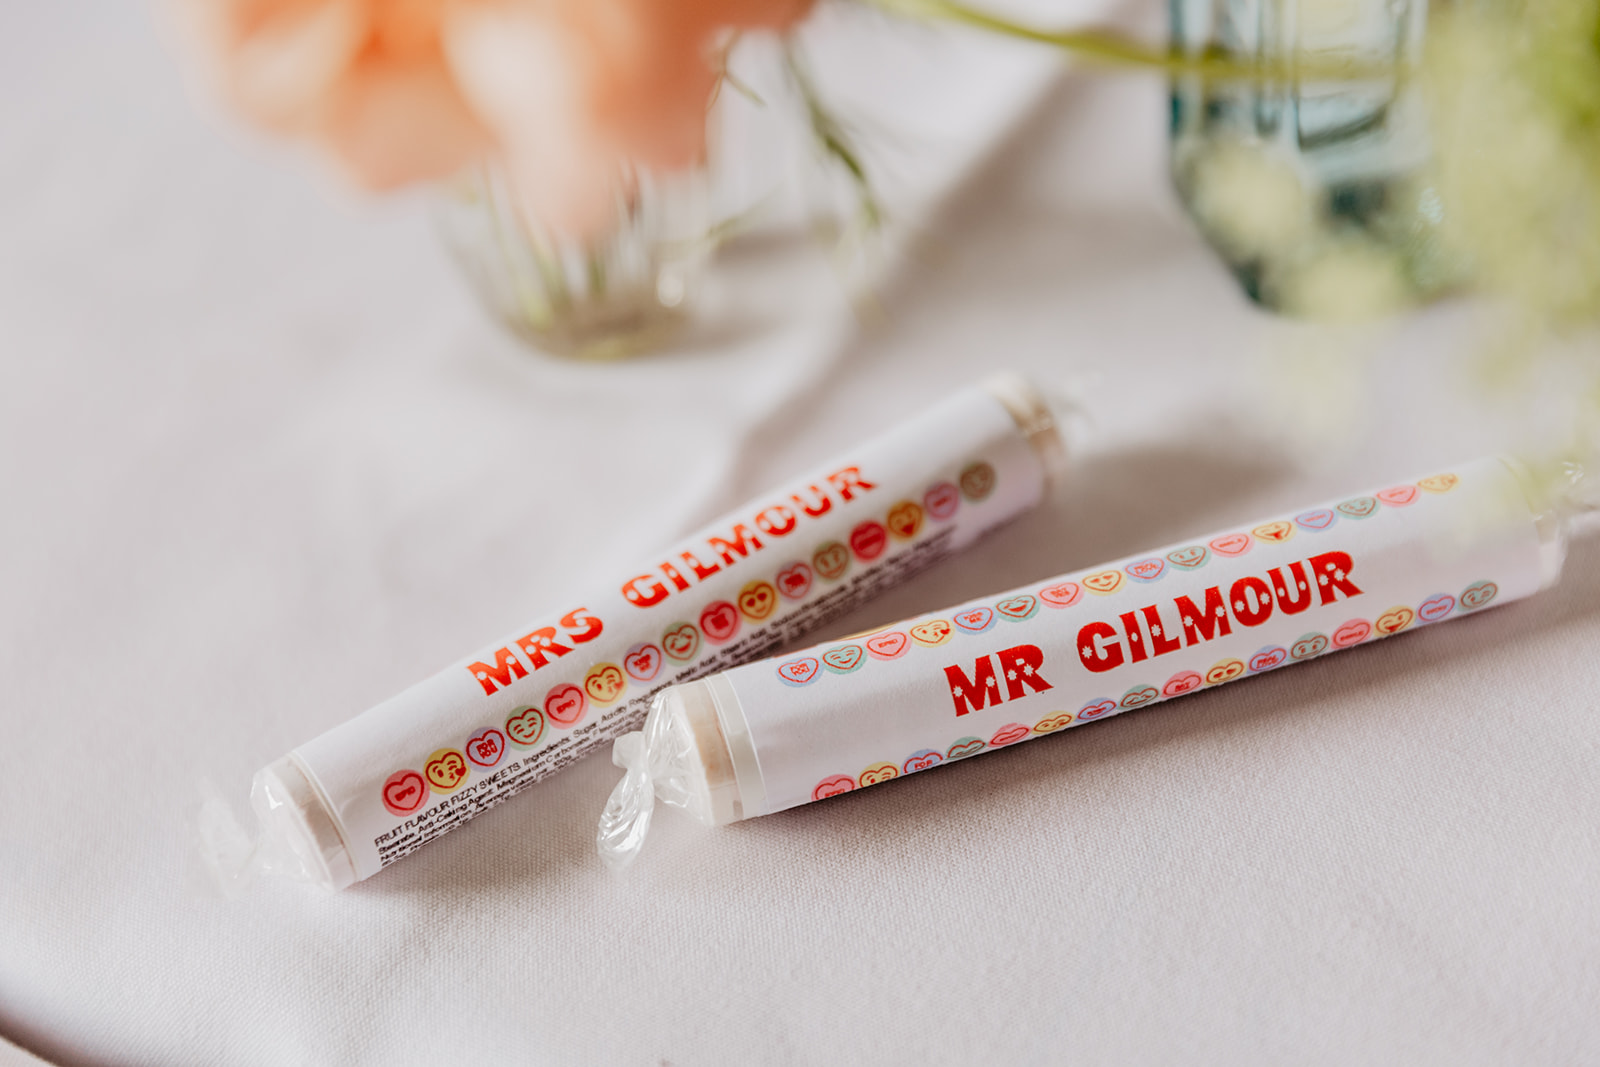 Personalised Love Heart sweets at a Secret Barn Wedding, West Sussex. By Olive Joy Photography